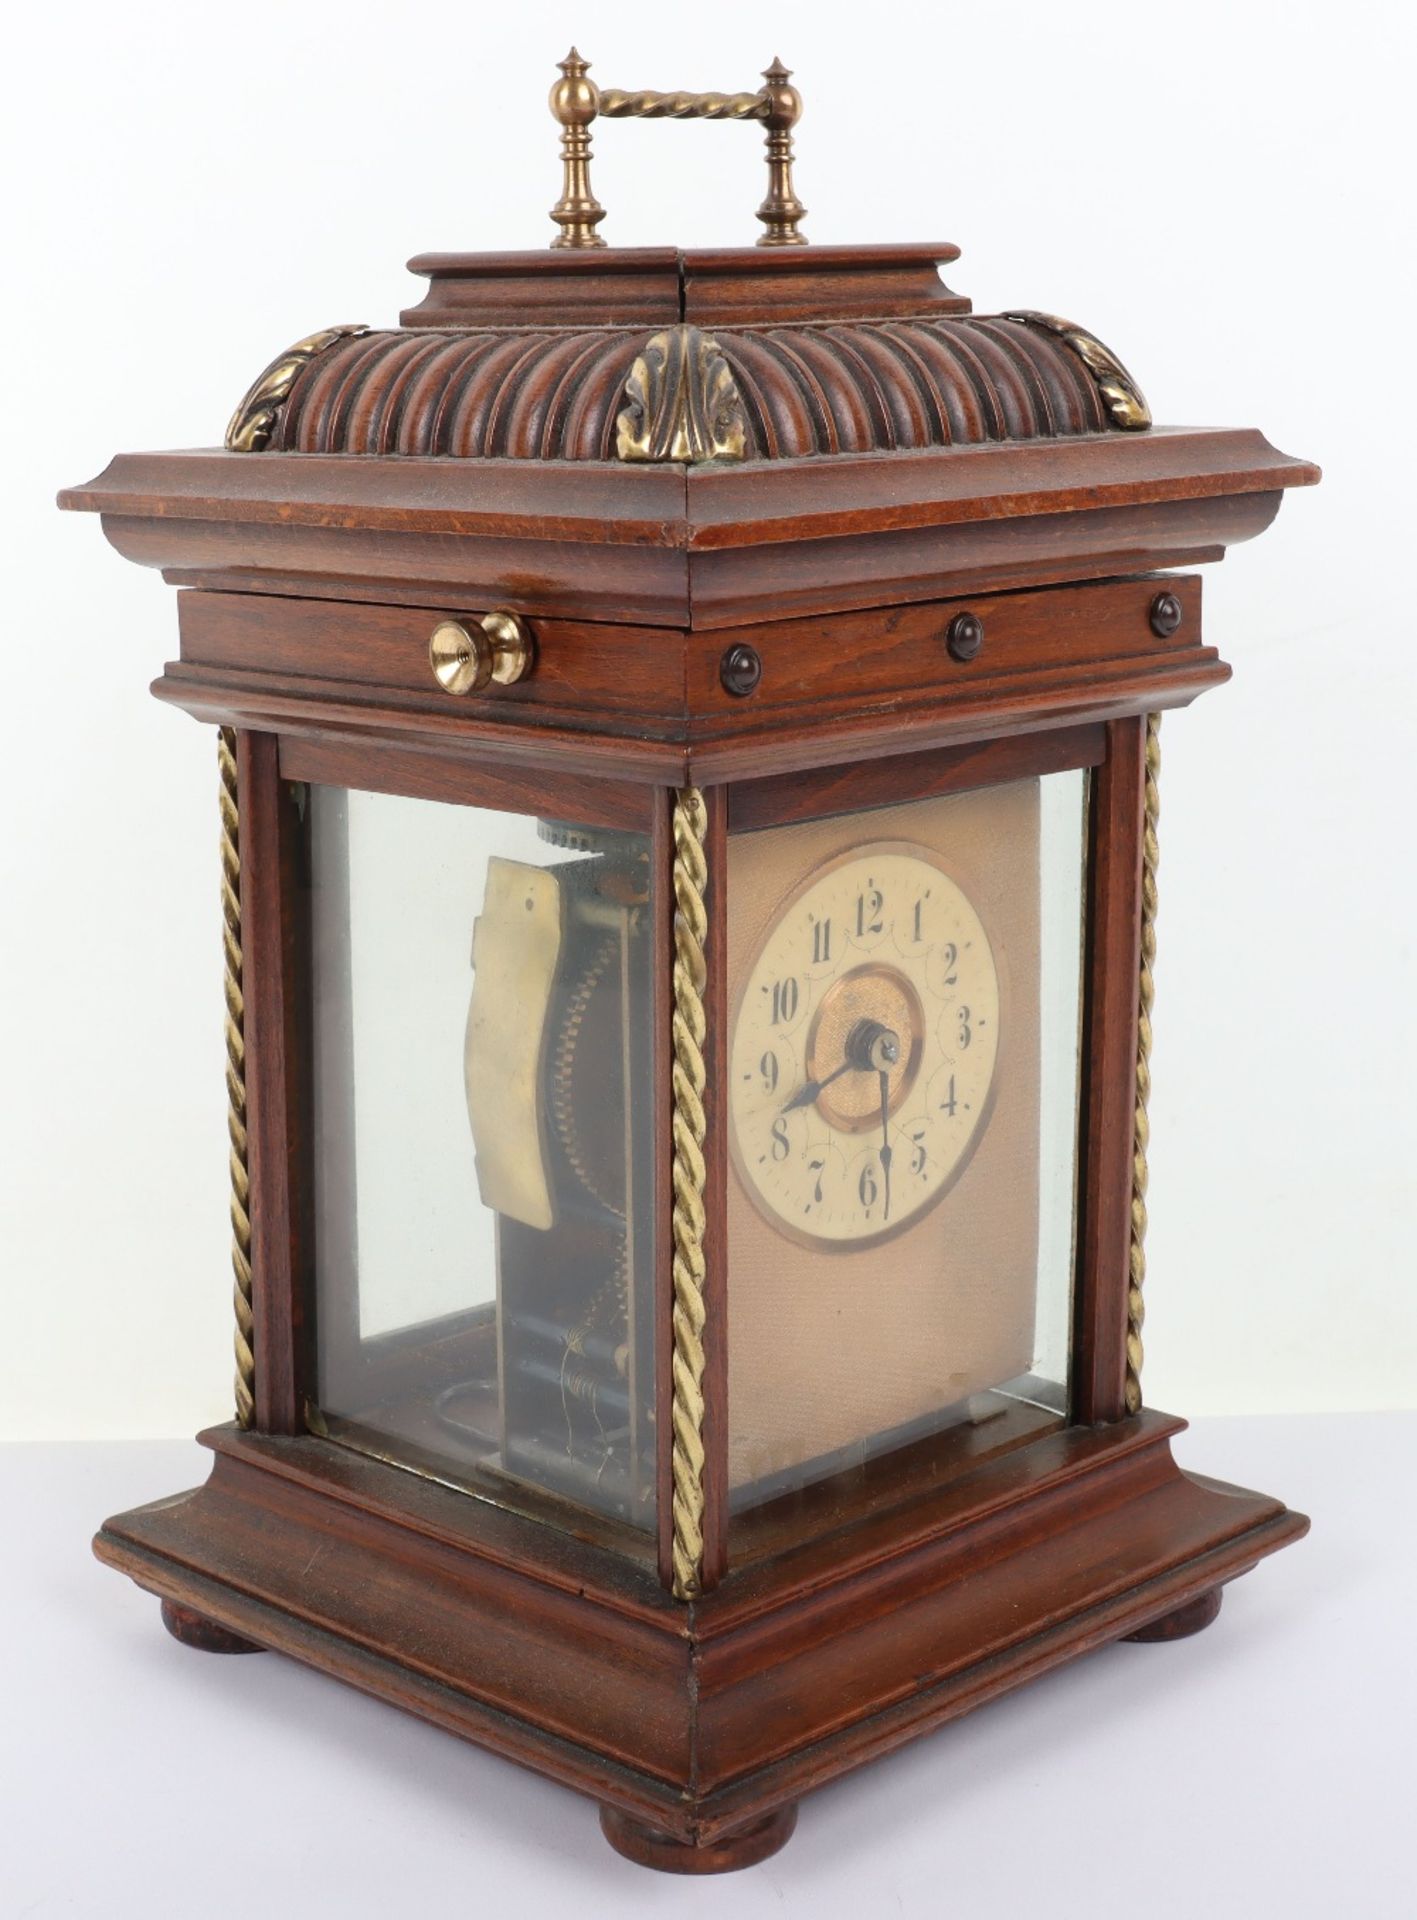 A German ‘Harmonie Symphonion’ mantle clock and musical box - Image 3 of 8